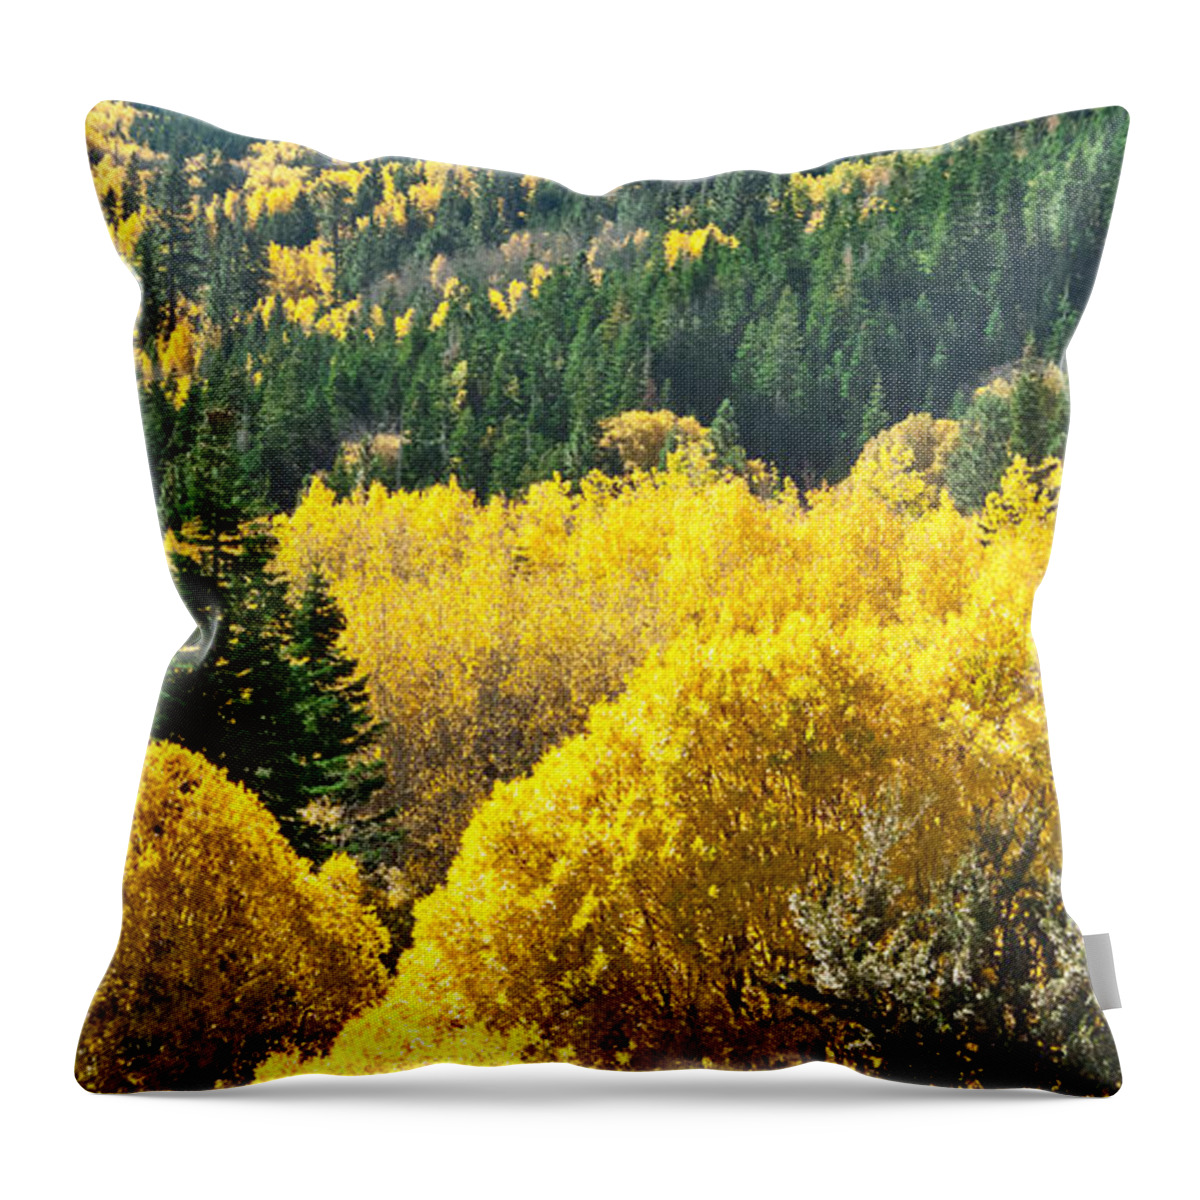 Aspen Throw Pillow featuring the photograph Aspen Hunt by L J Oakes